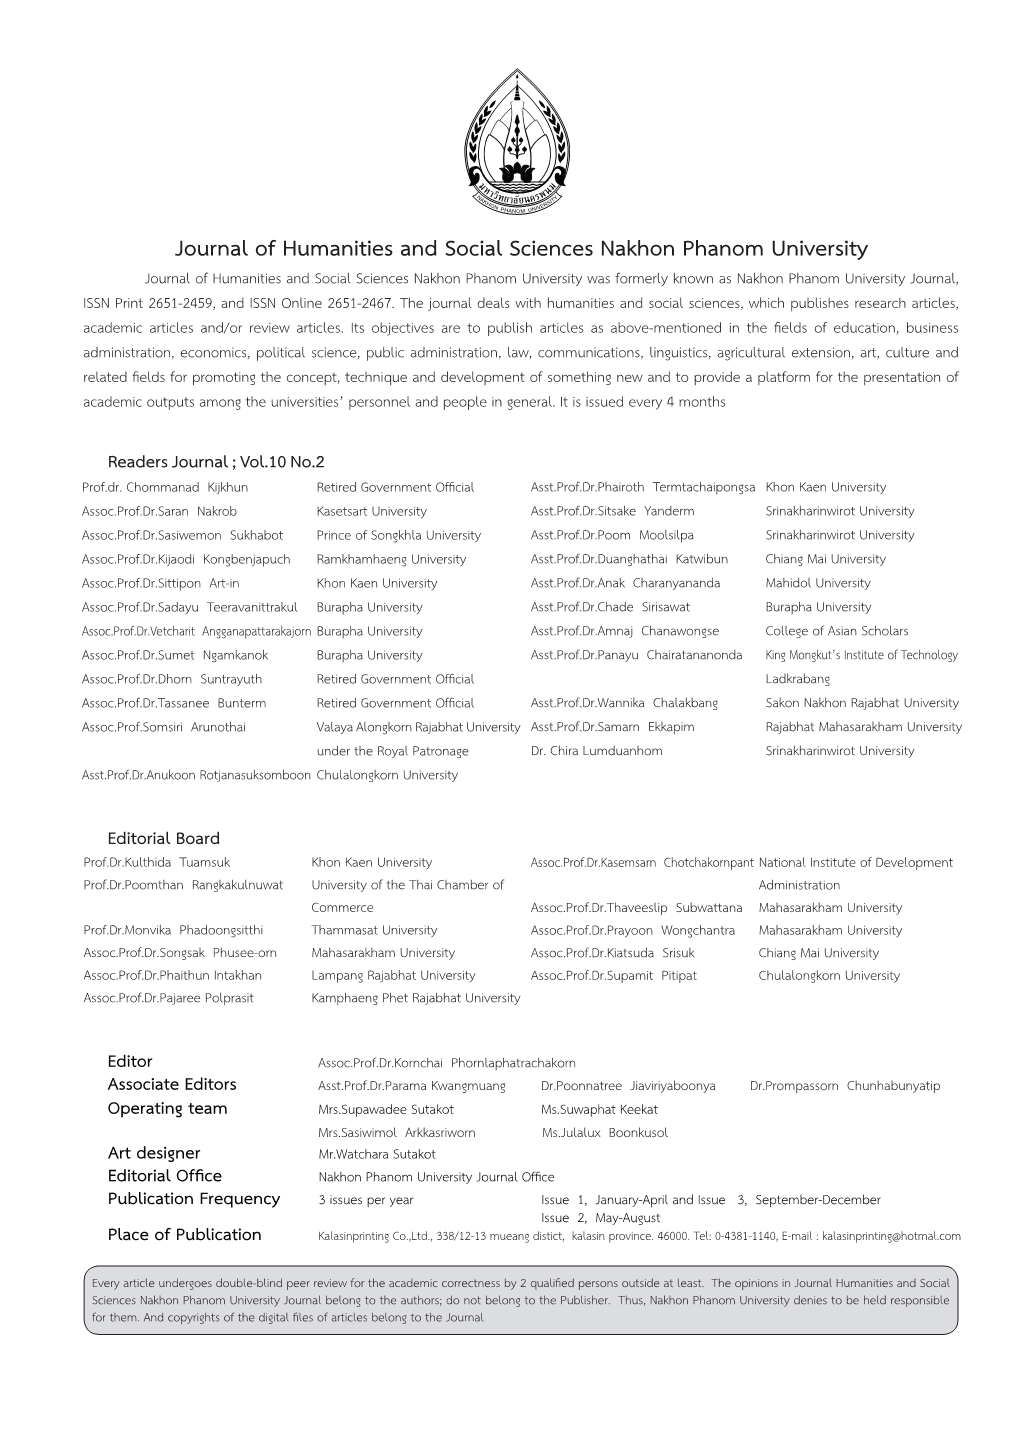 Journal of Humanities and Social Sciences Nakhon Phanom University Was Formerly Known As Nakhon Phanom University Journal, Politicalreviewreview Articles